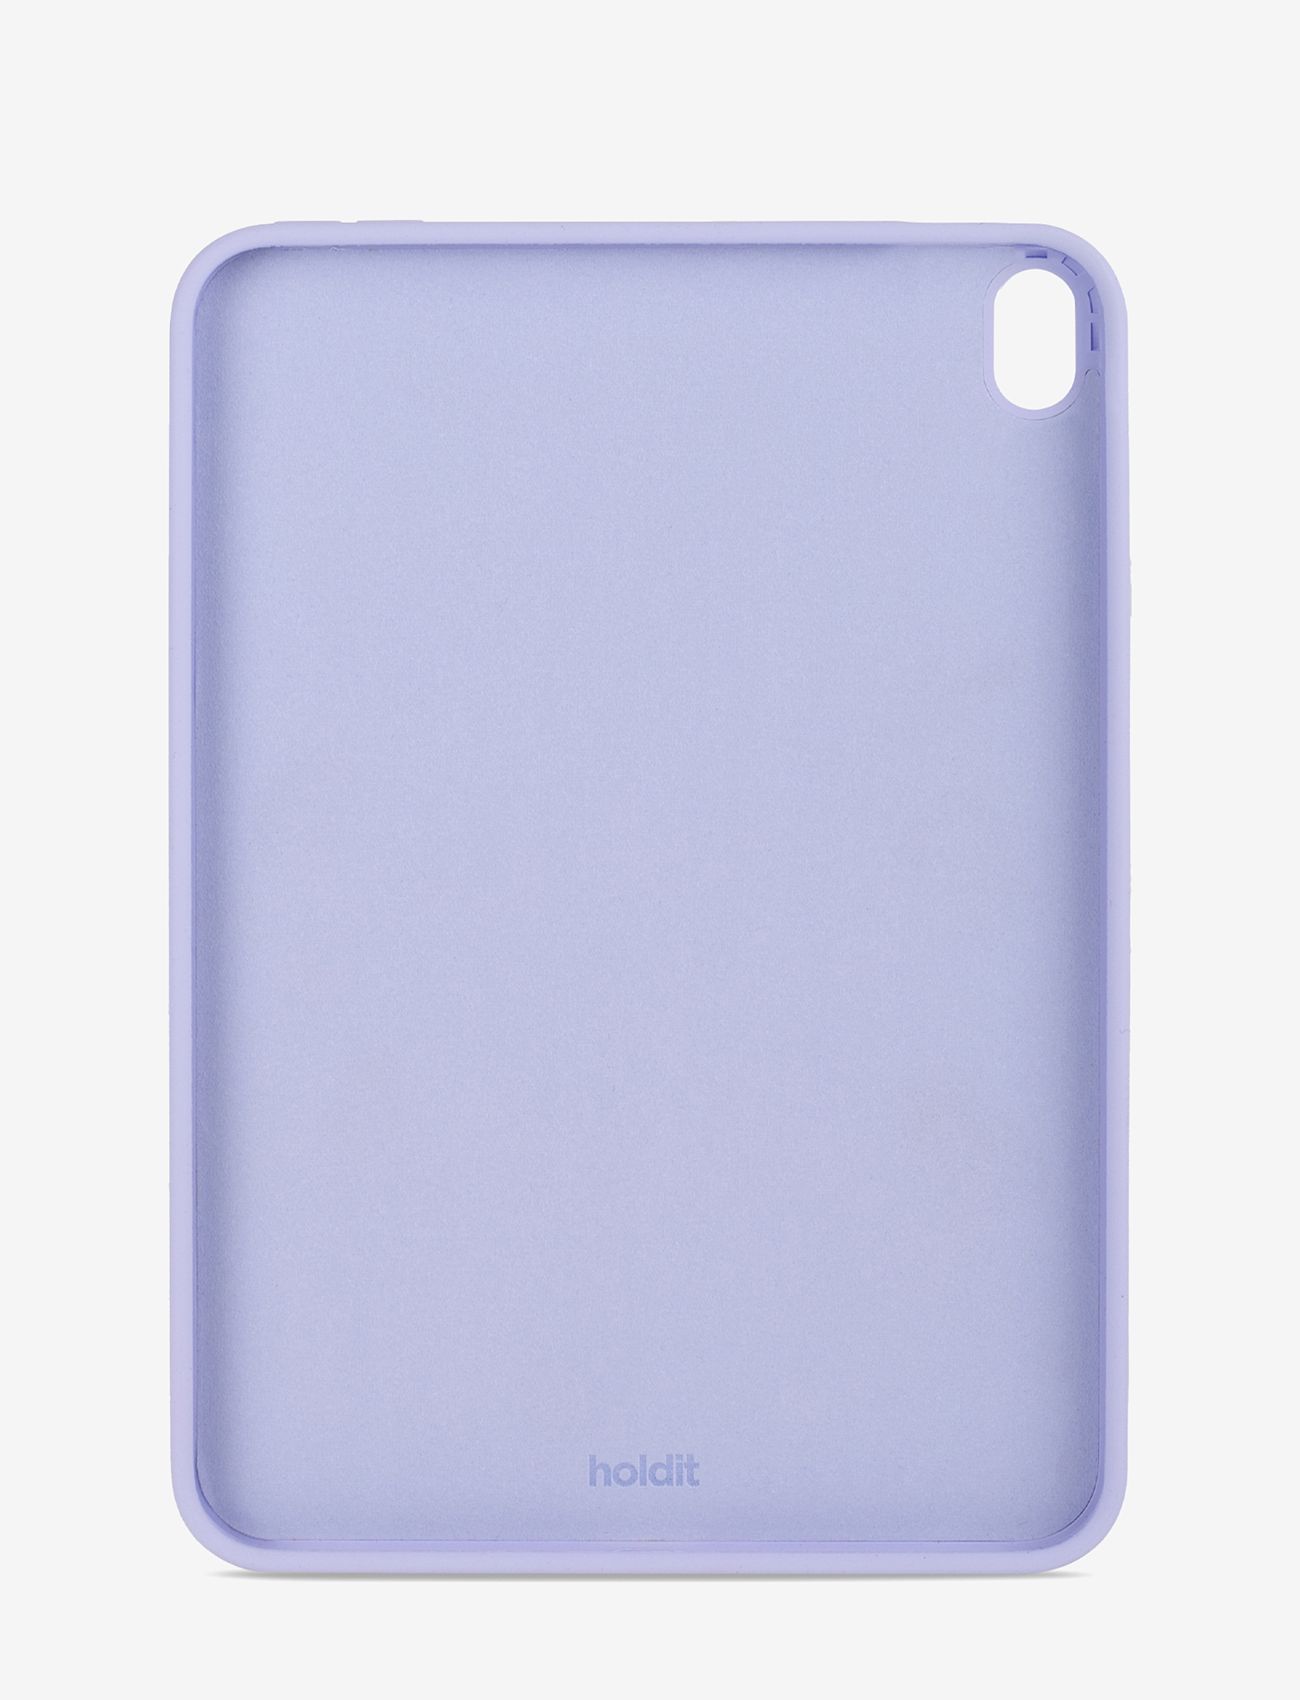 Holdit - Silicone Case iPad Air 10.9 - tablet cases - lavender - 1